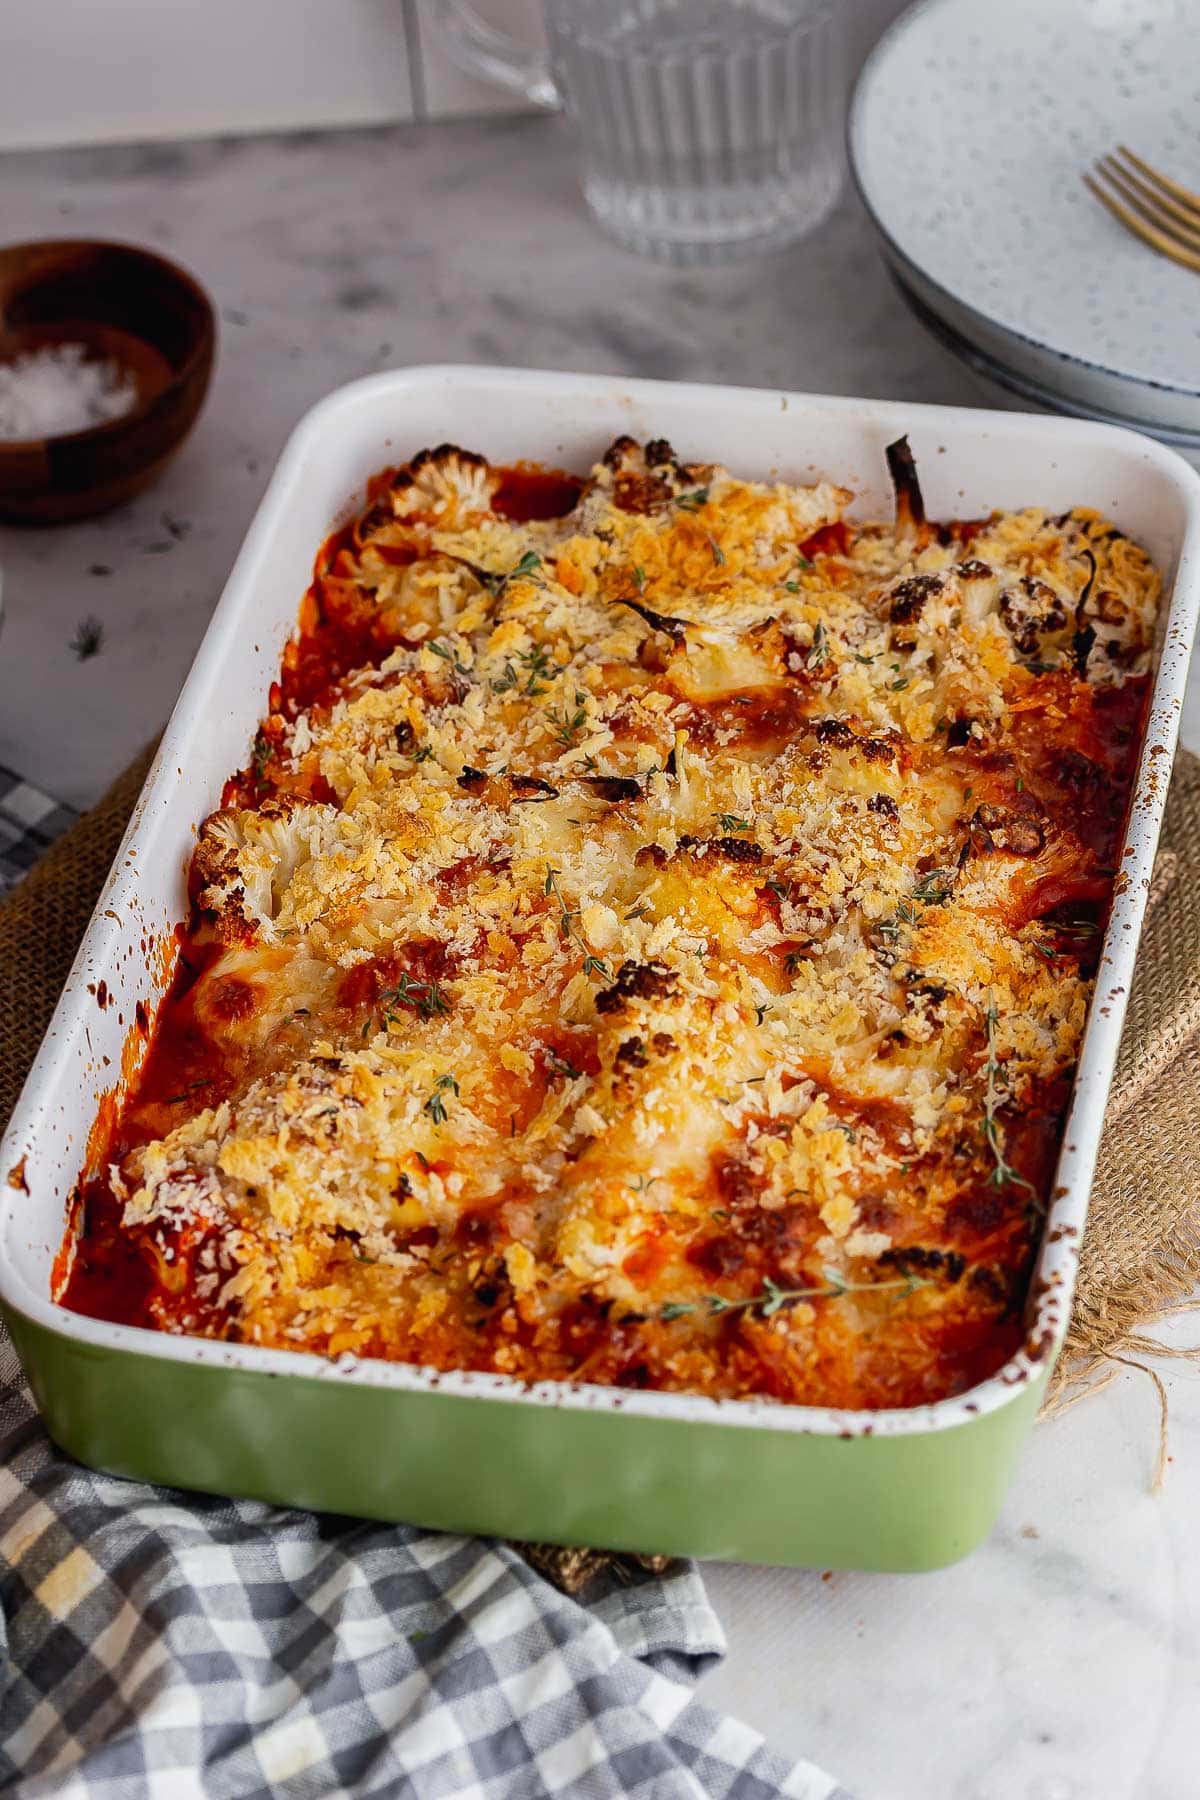 Green baking dish of cheese and tomato baked cauliflower on a marble surface